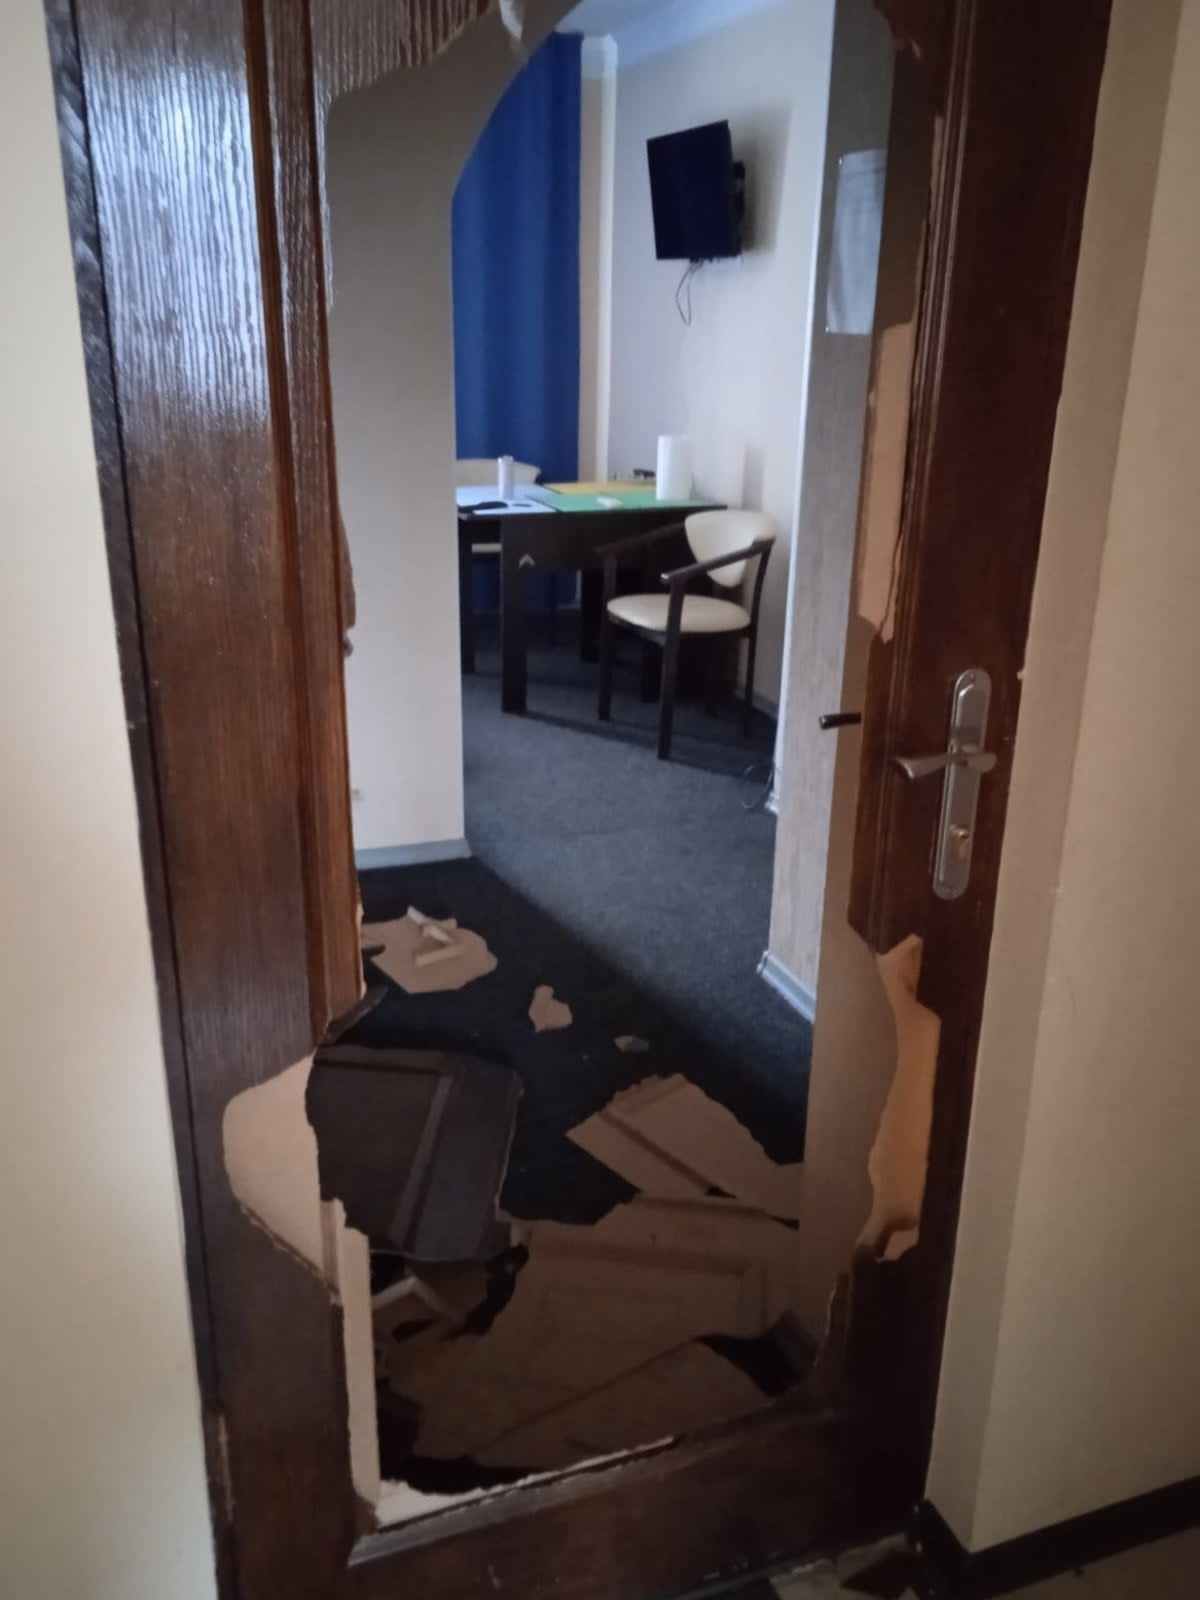 Hotel rooms damaged by Russian occupation in Tetyana Shevchenko’s hotel in Trostyanets (Askold Krushelnycky/The Independent)